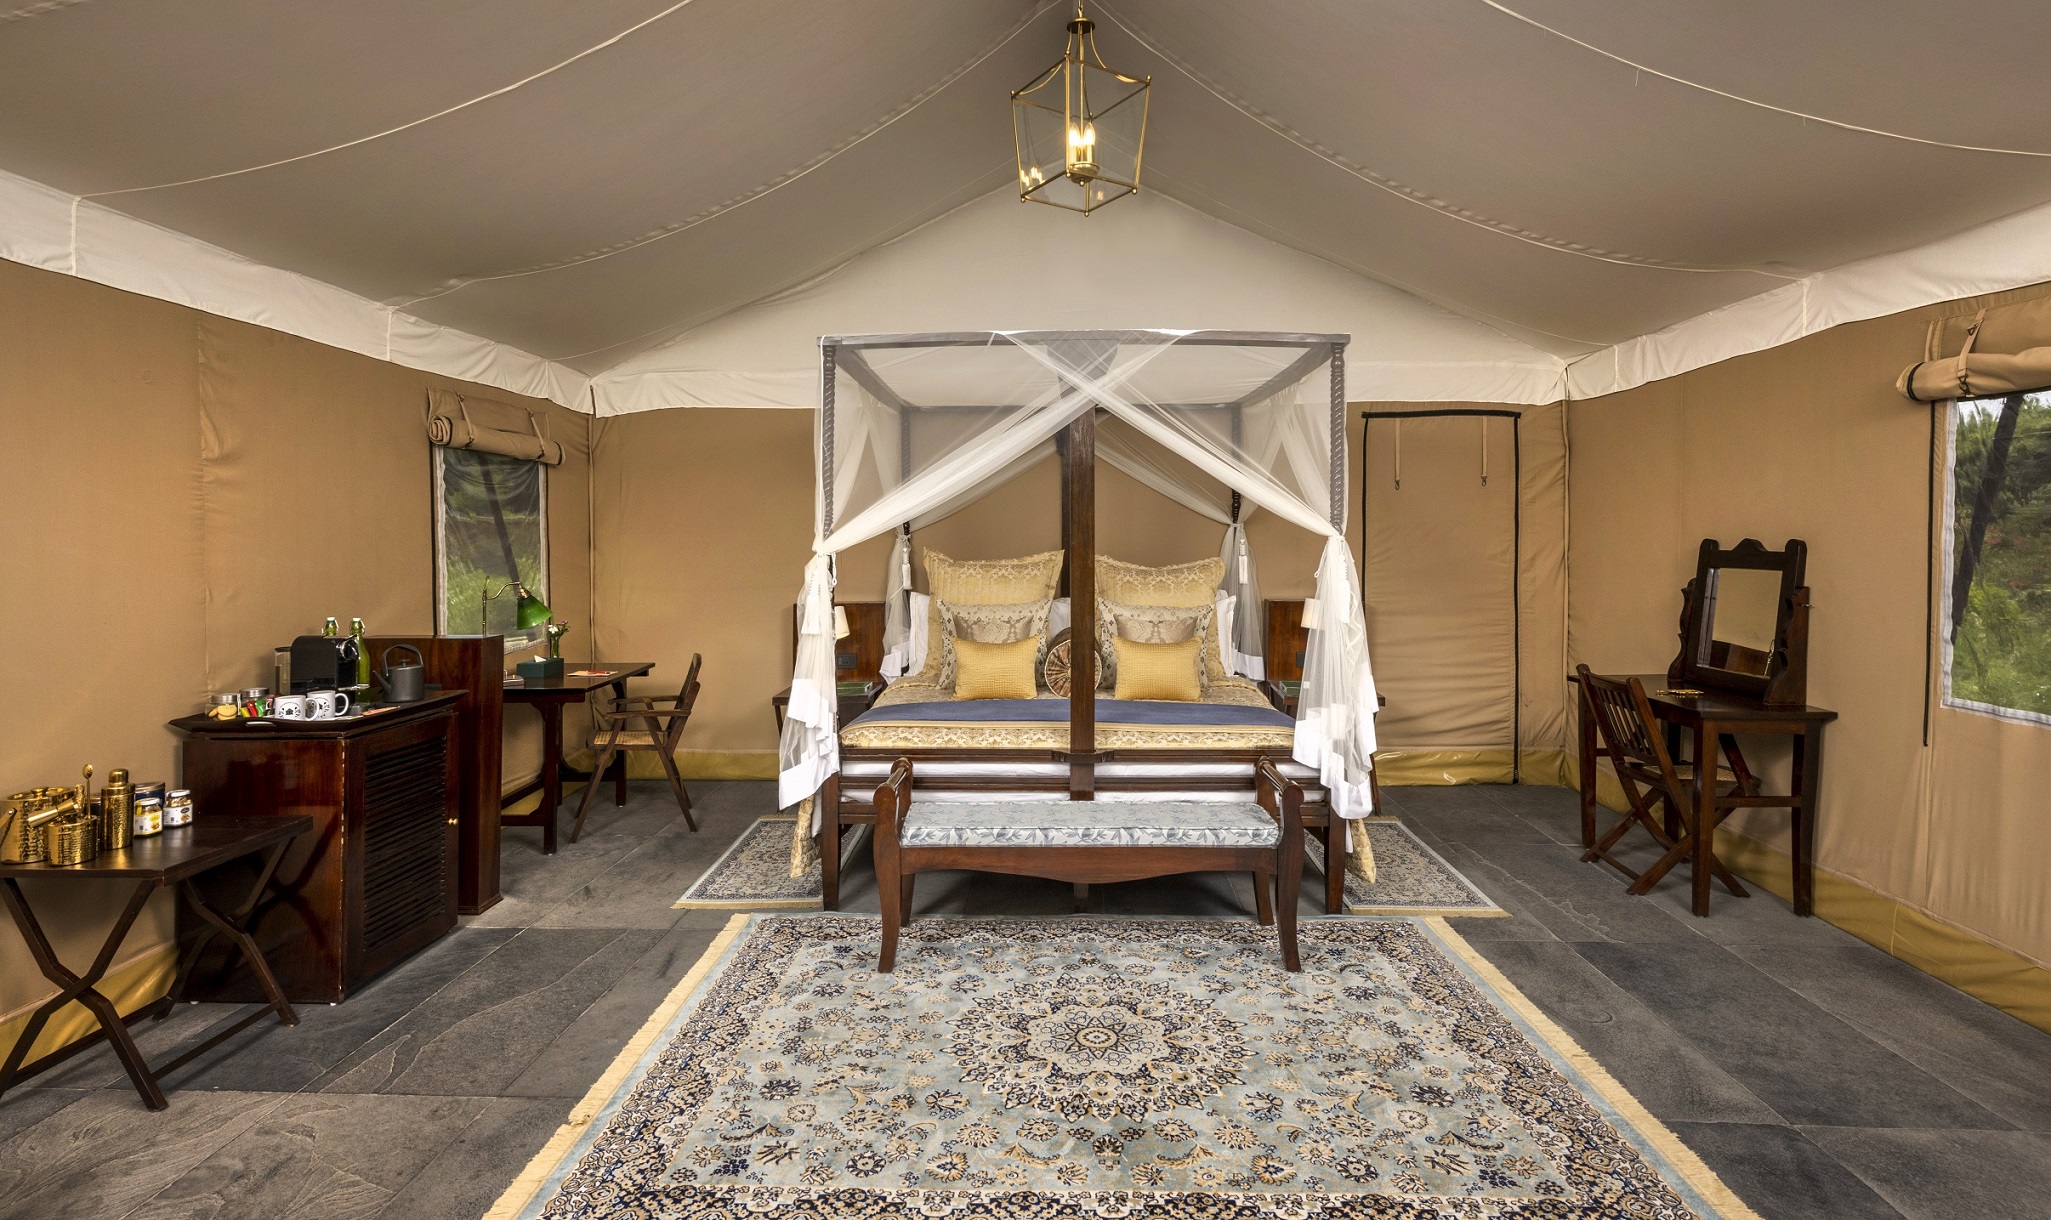 Luxury glamping at the all new Aalia Jungle Retreat & Spa by Claridges